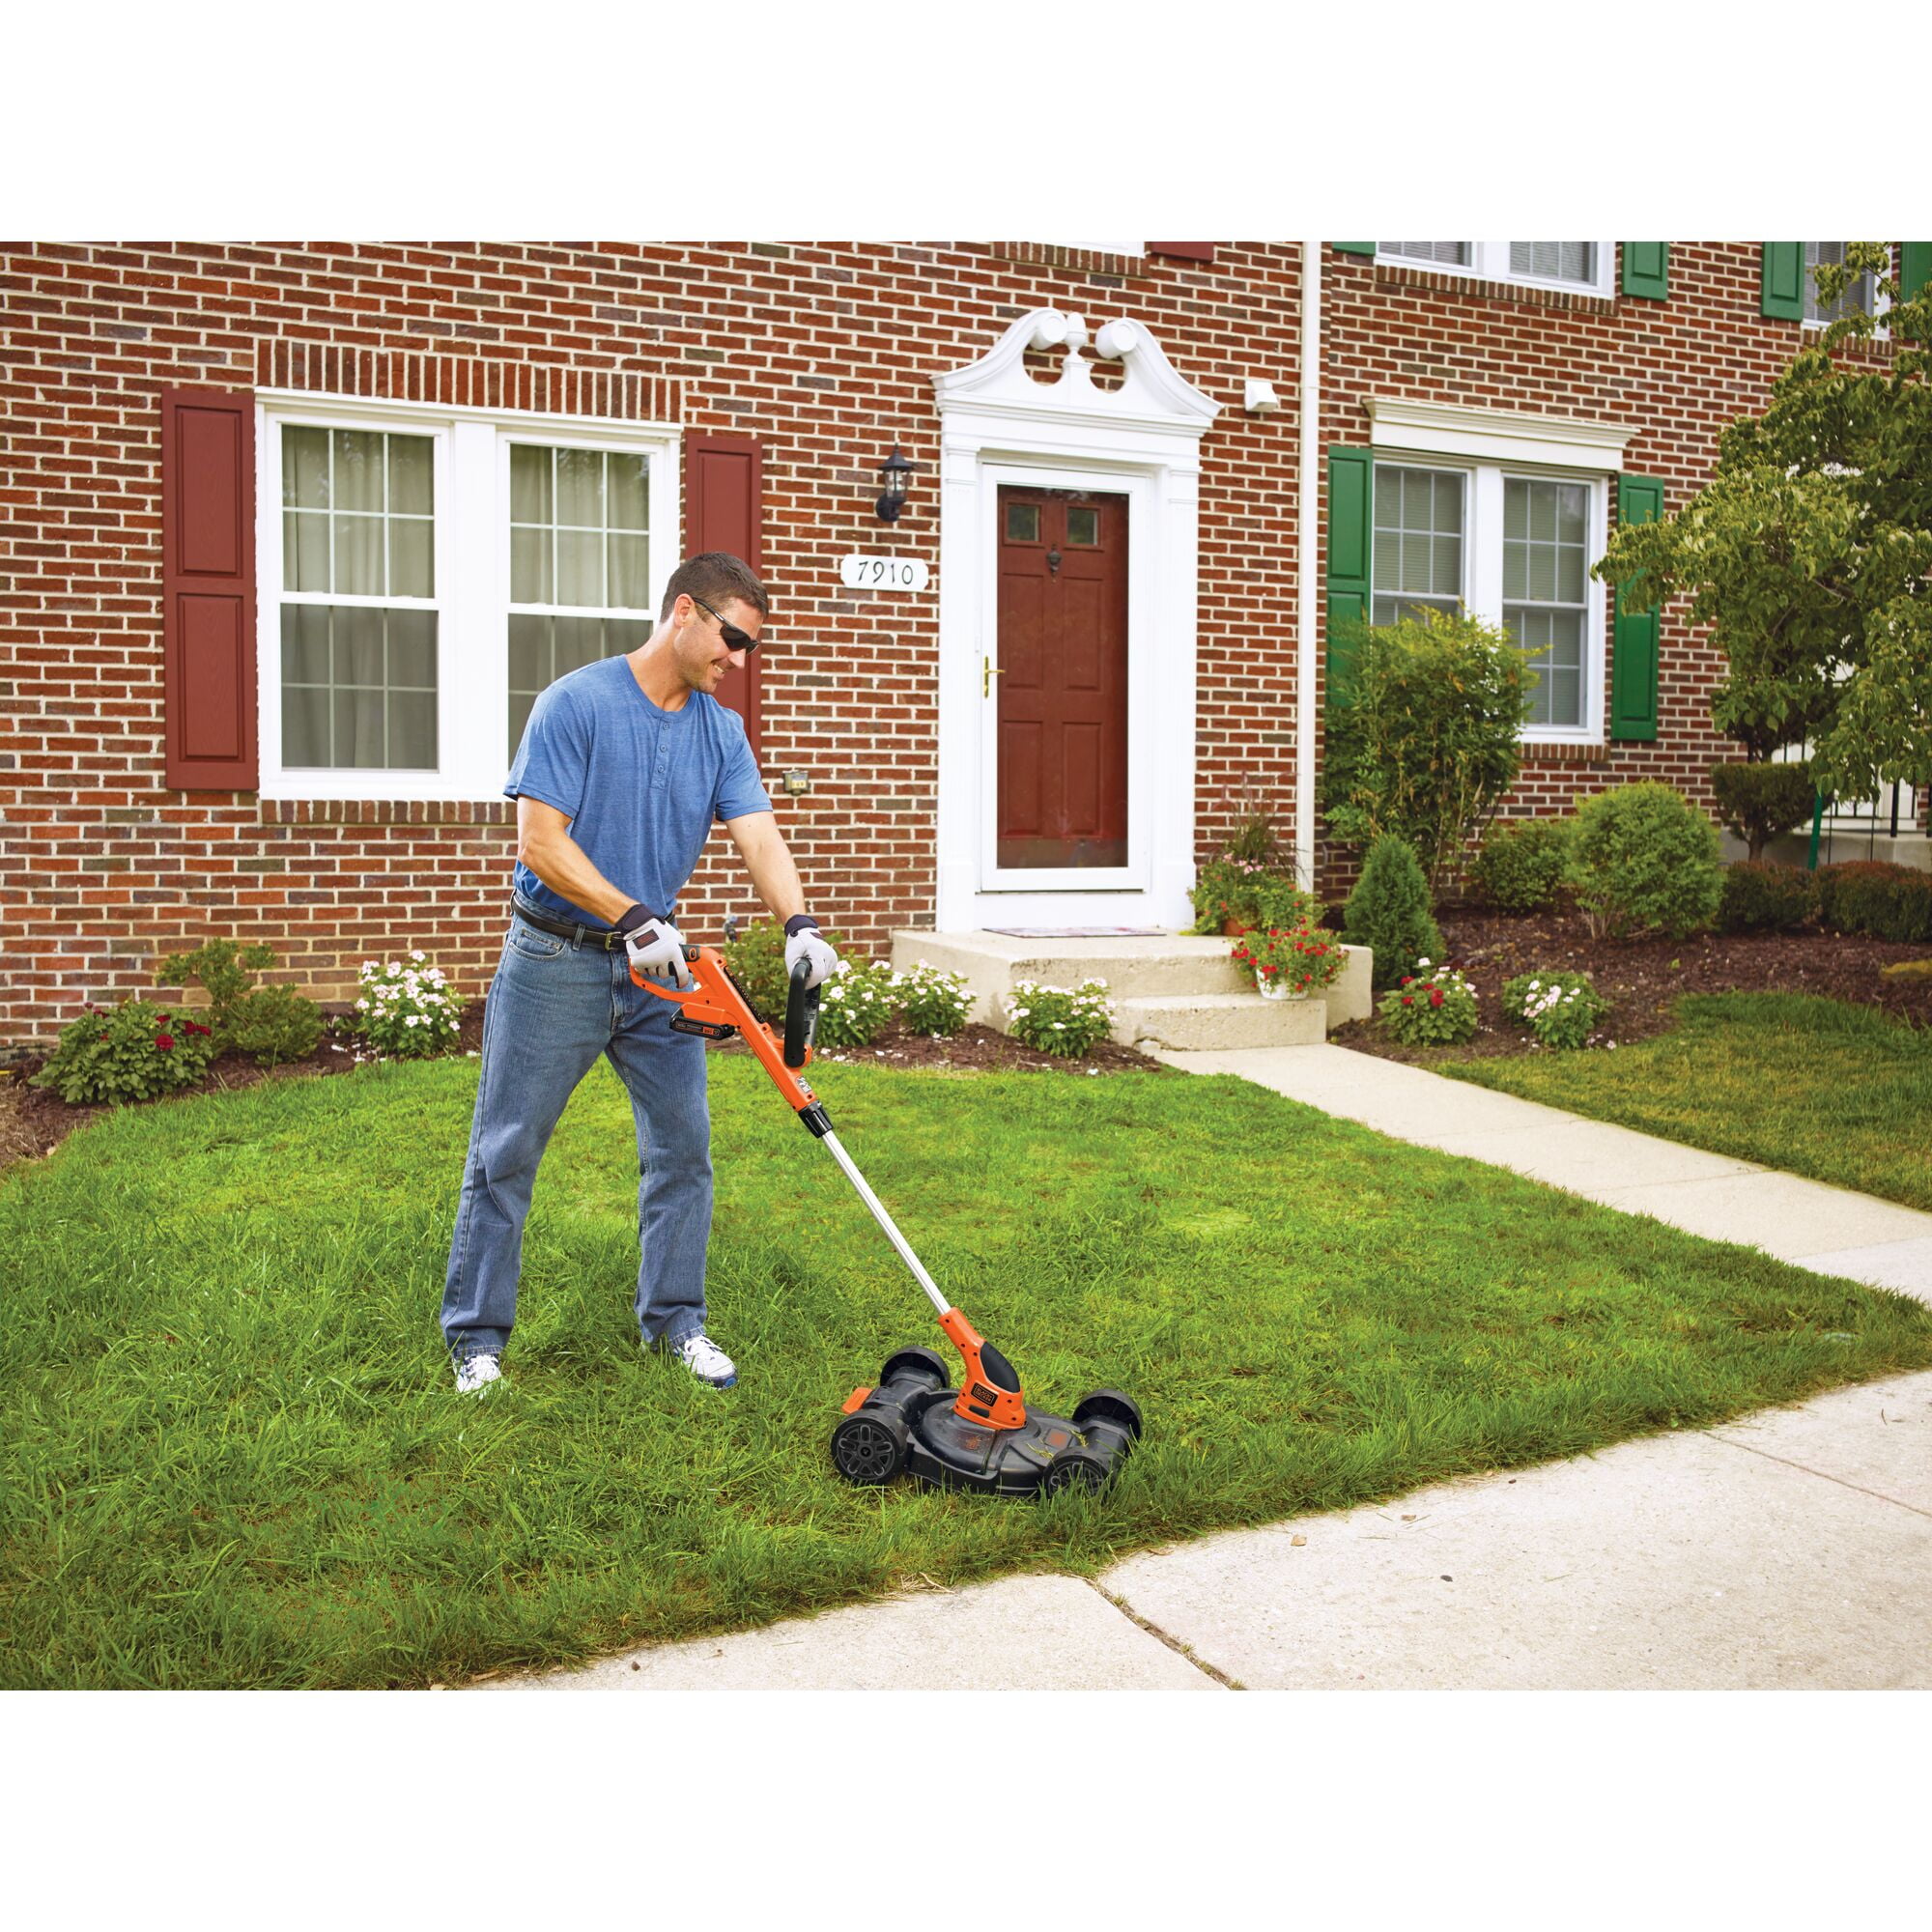 BLACK+DECKER 20V MAX Cordless 12 Lithium-Ion 3-in-1 Trimmer/Edger and Mower  + 2 Batteries 